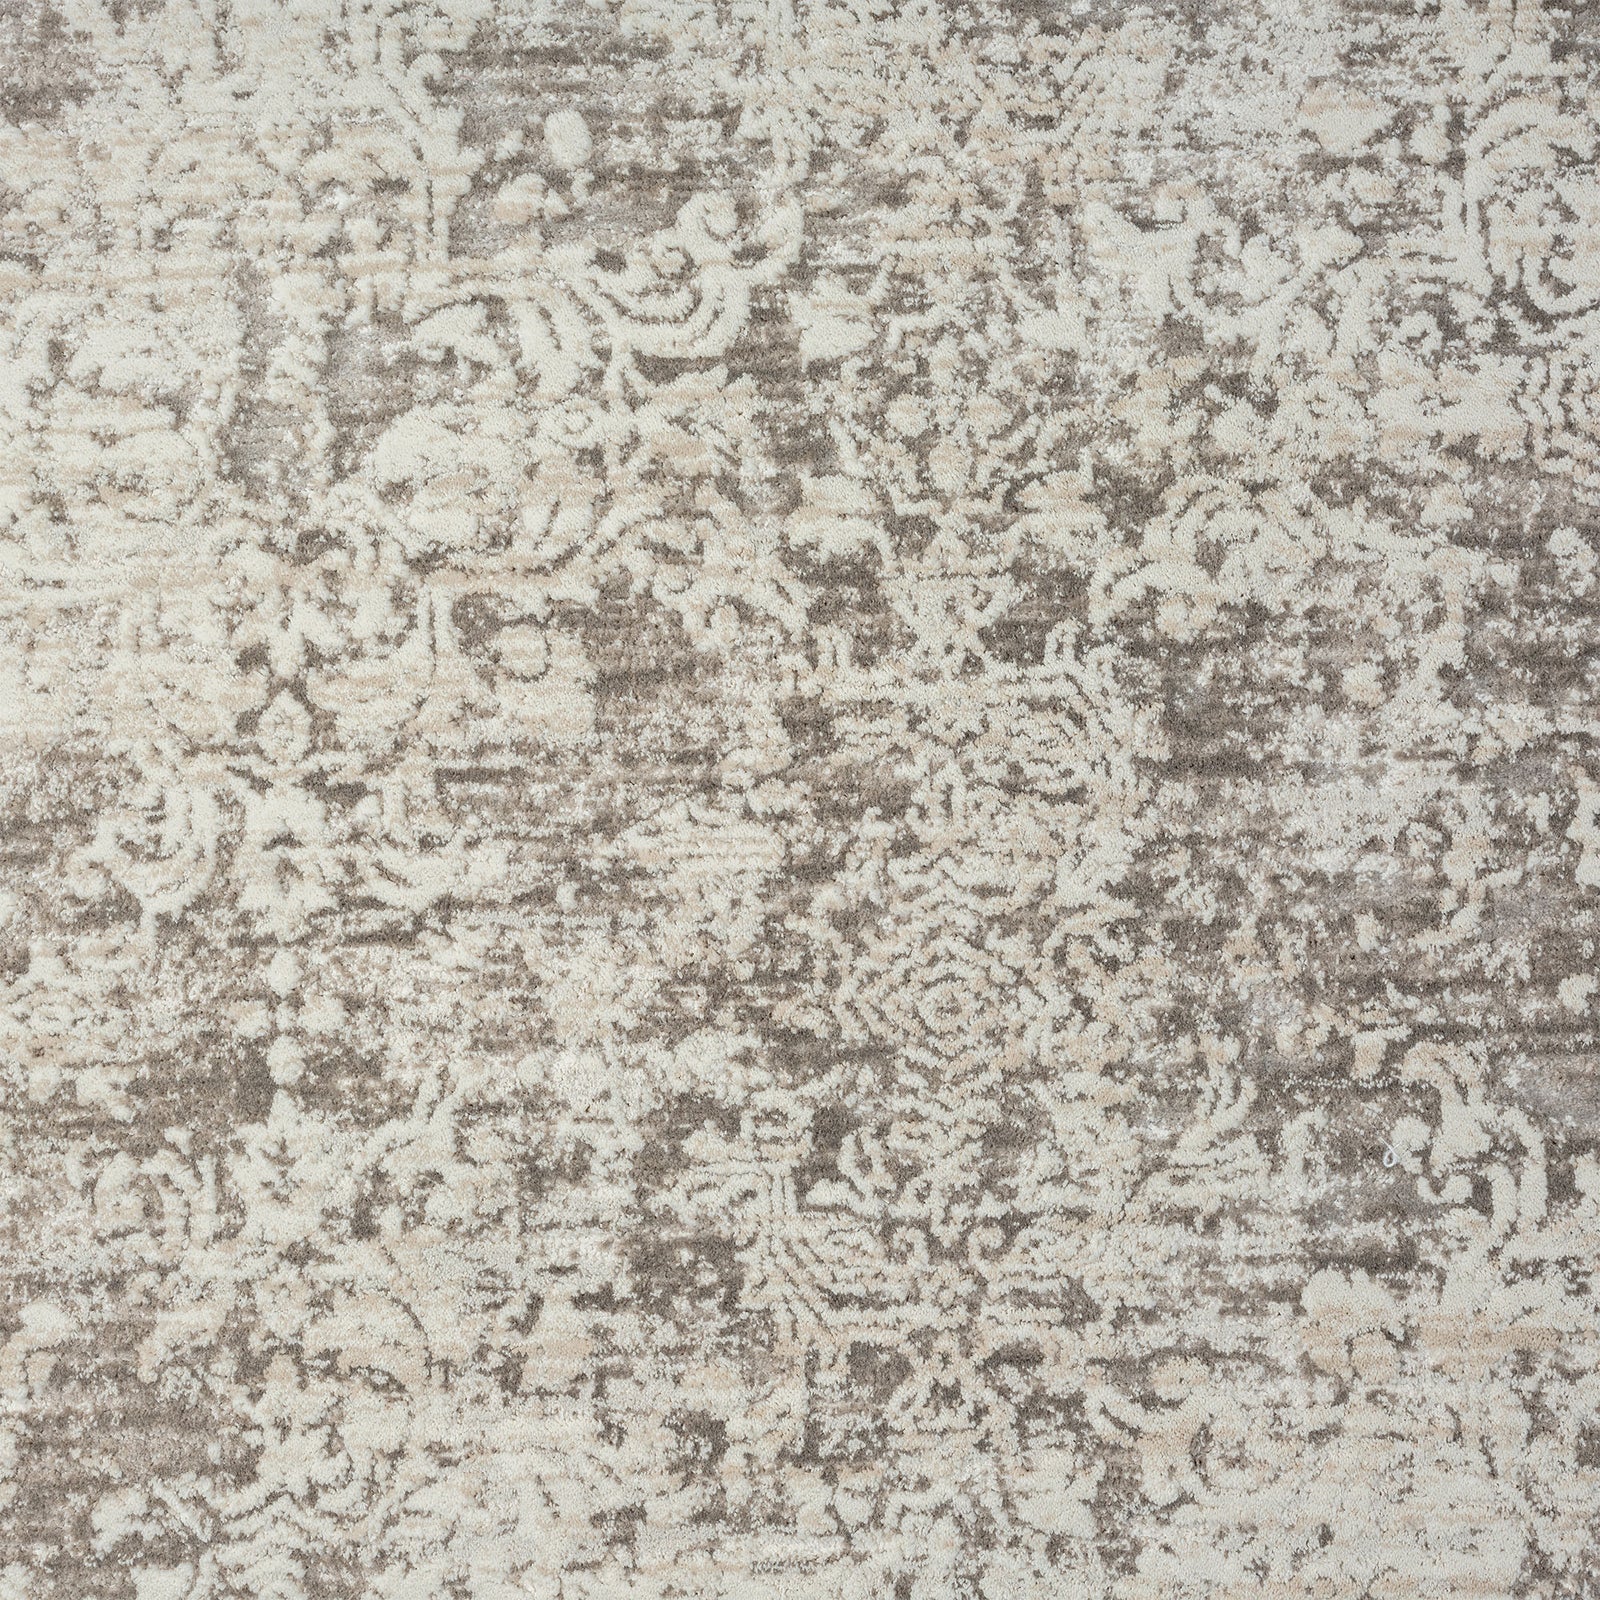 2' X 8' Gray Abstract Distressed Runner Rug